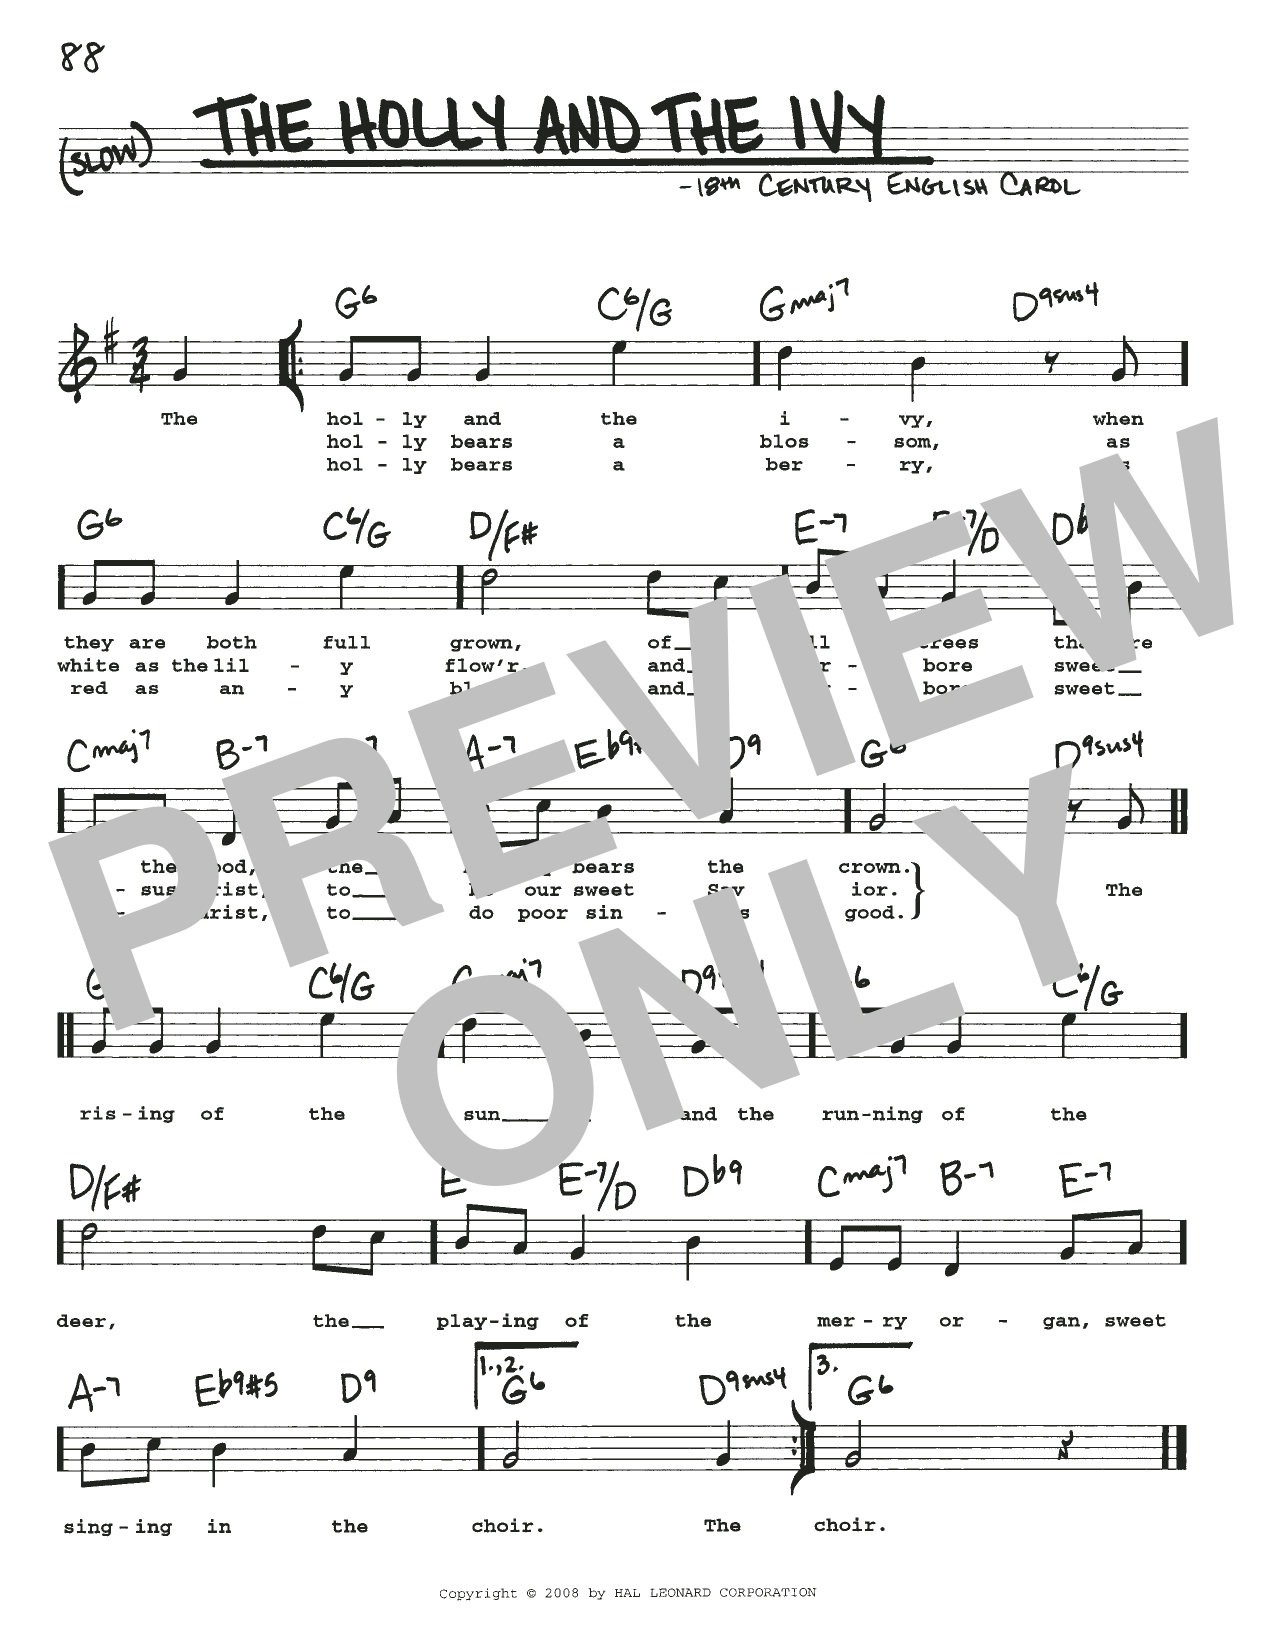 Download 18th Century English Carol The Holly And The Ivy Sheet Music